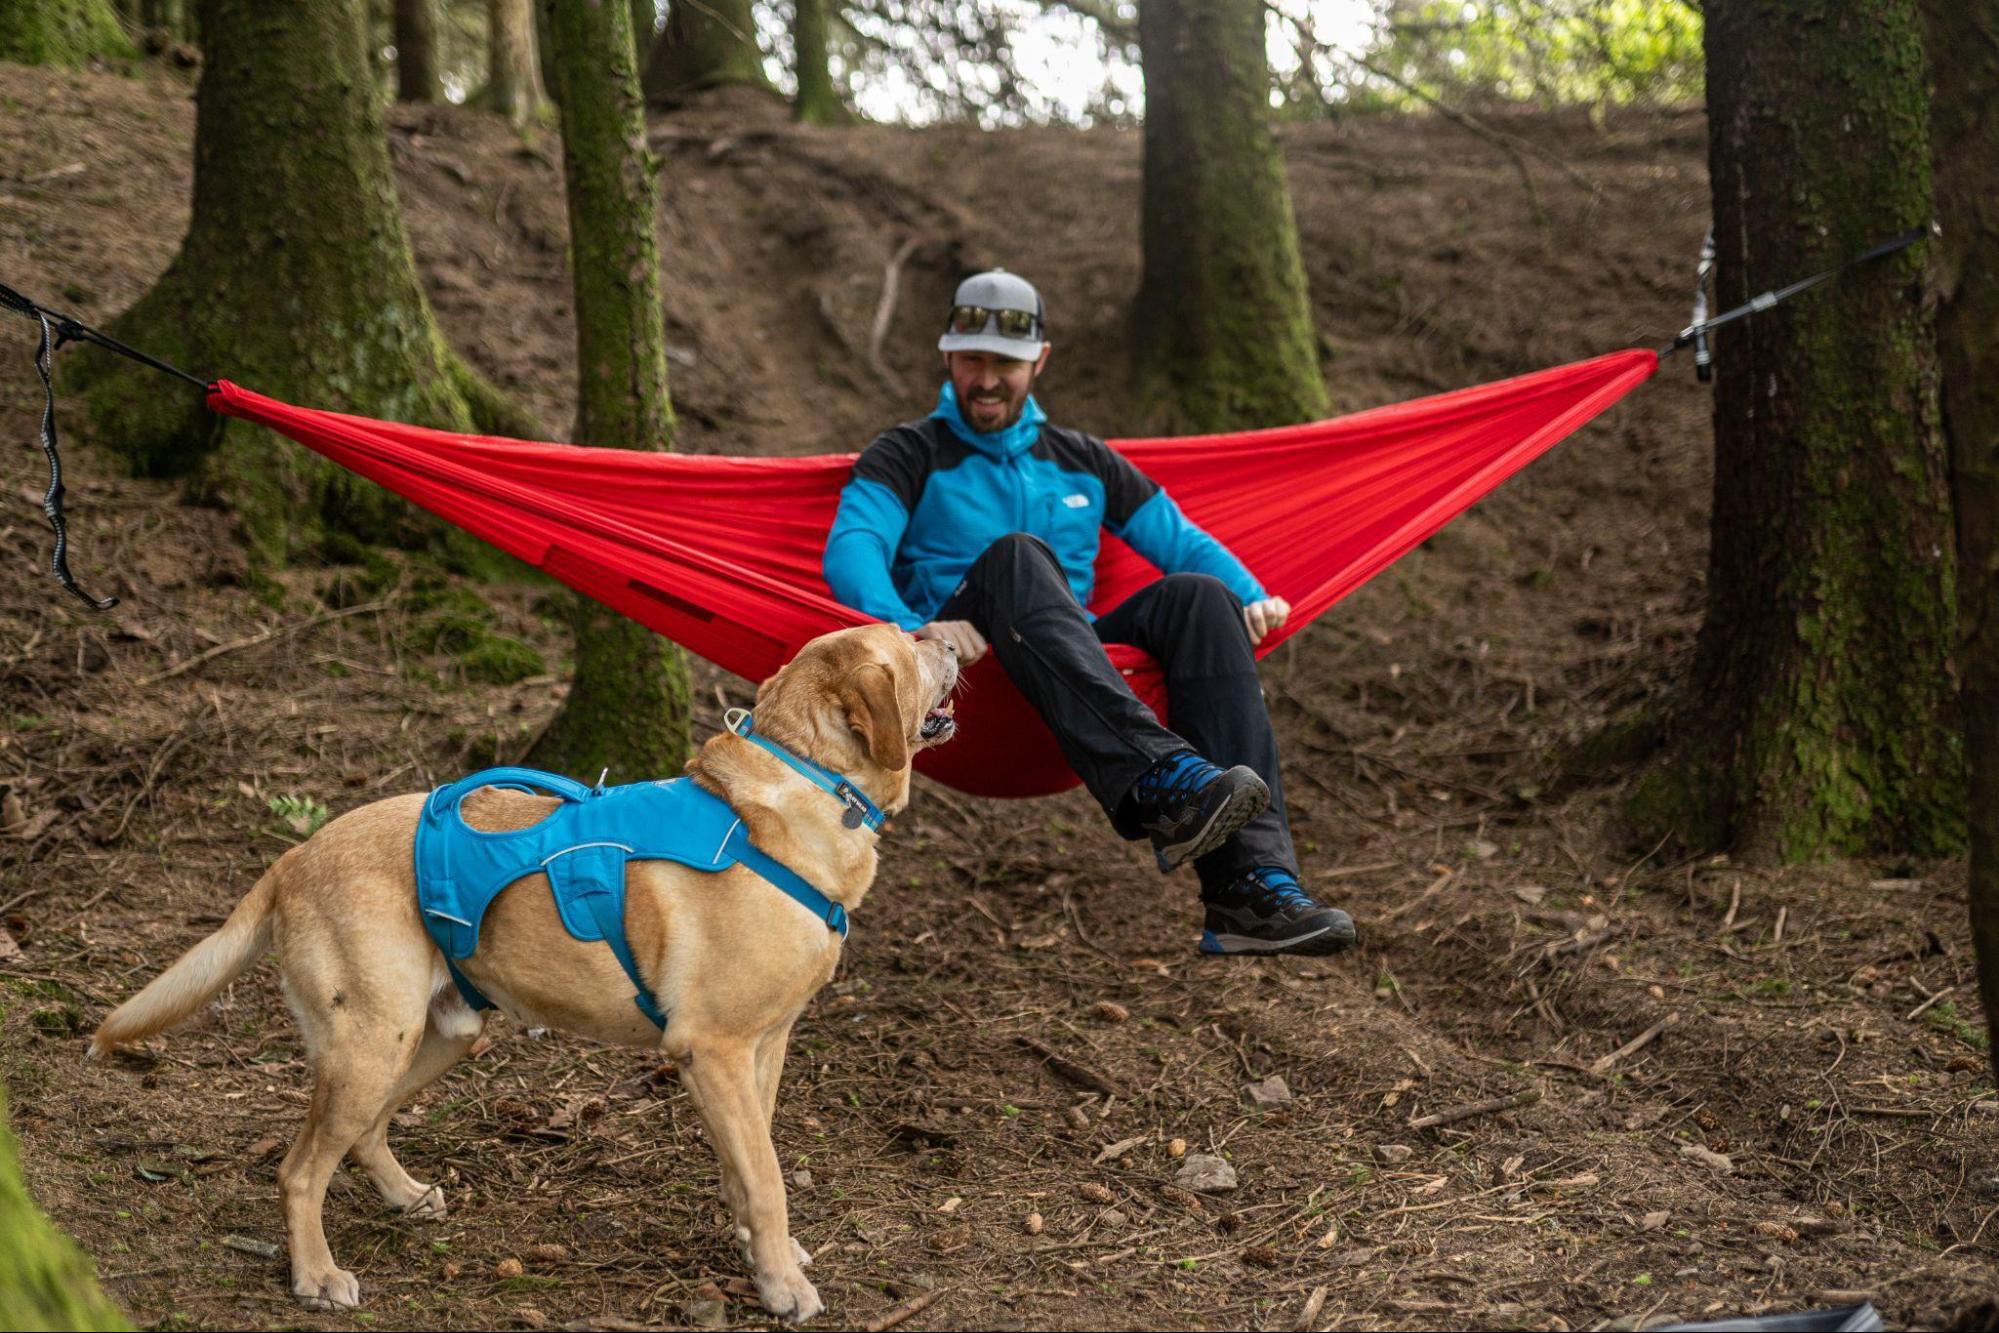 A man sits in a hammock next to his dog on a backpacking trip.